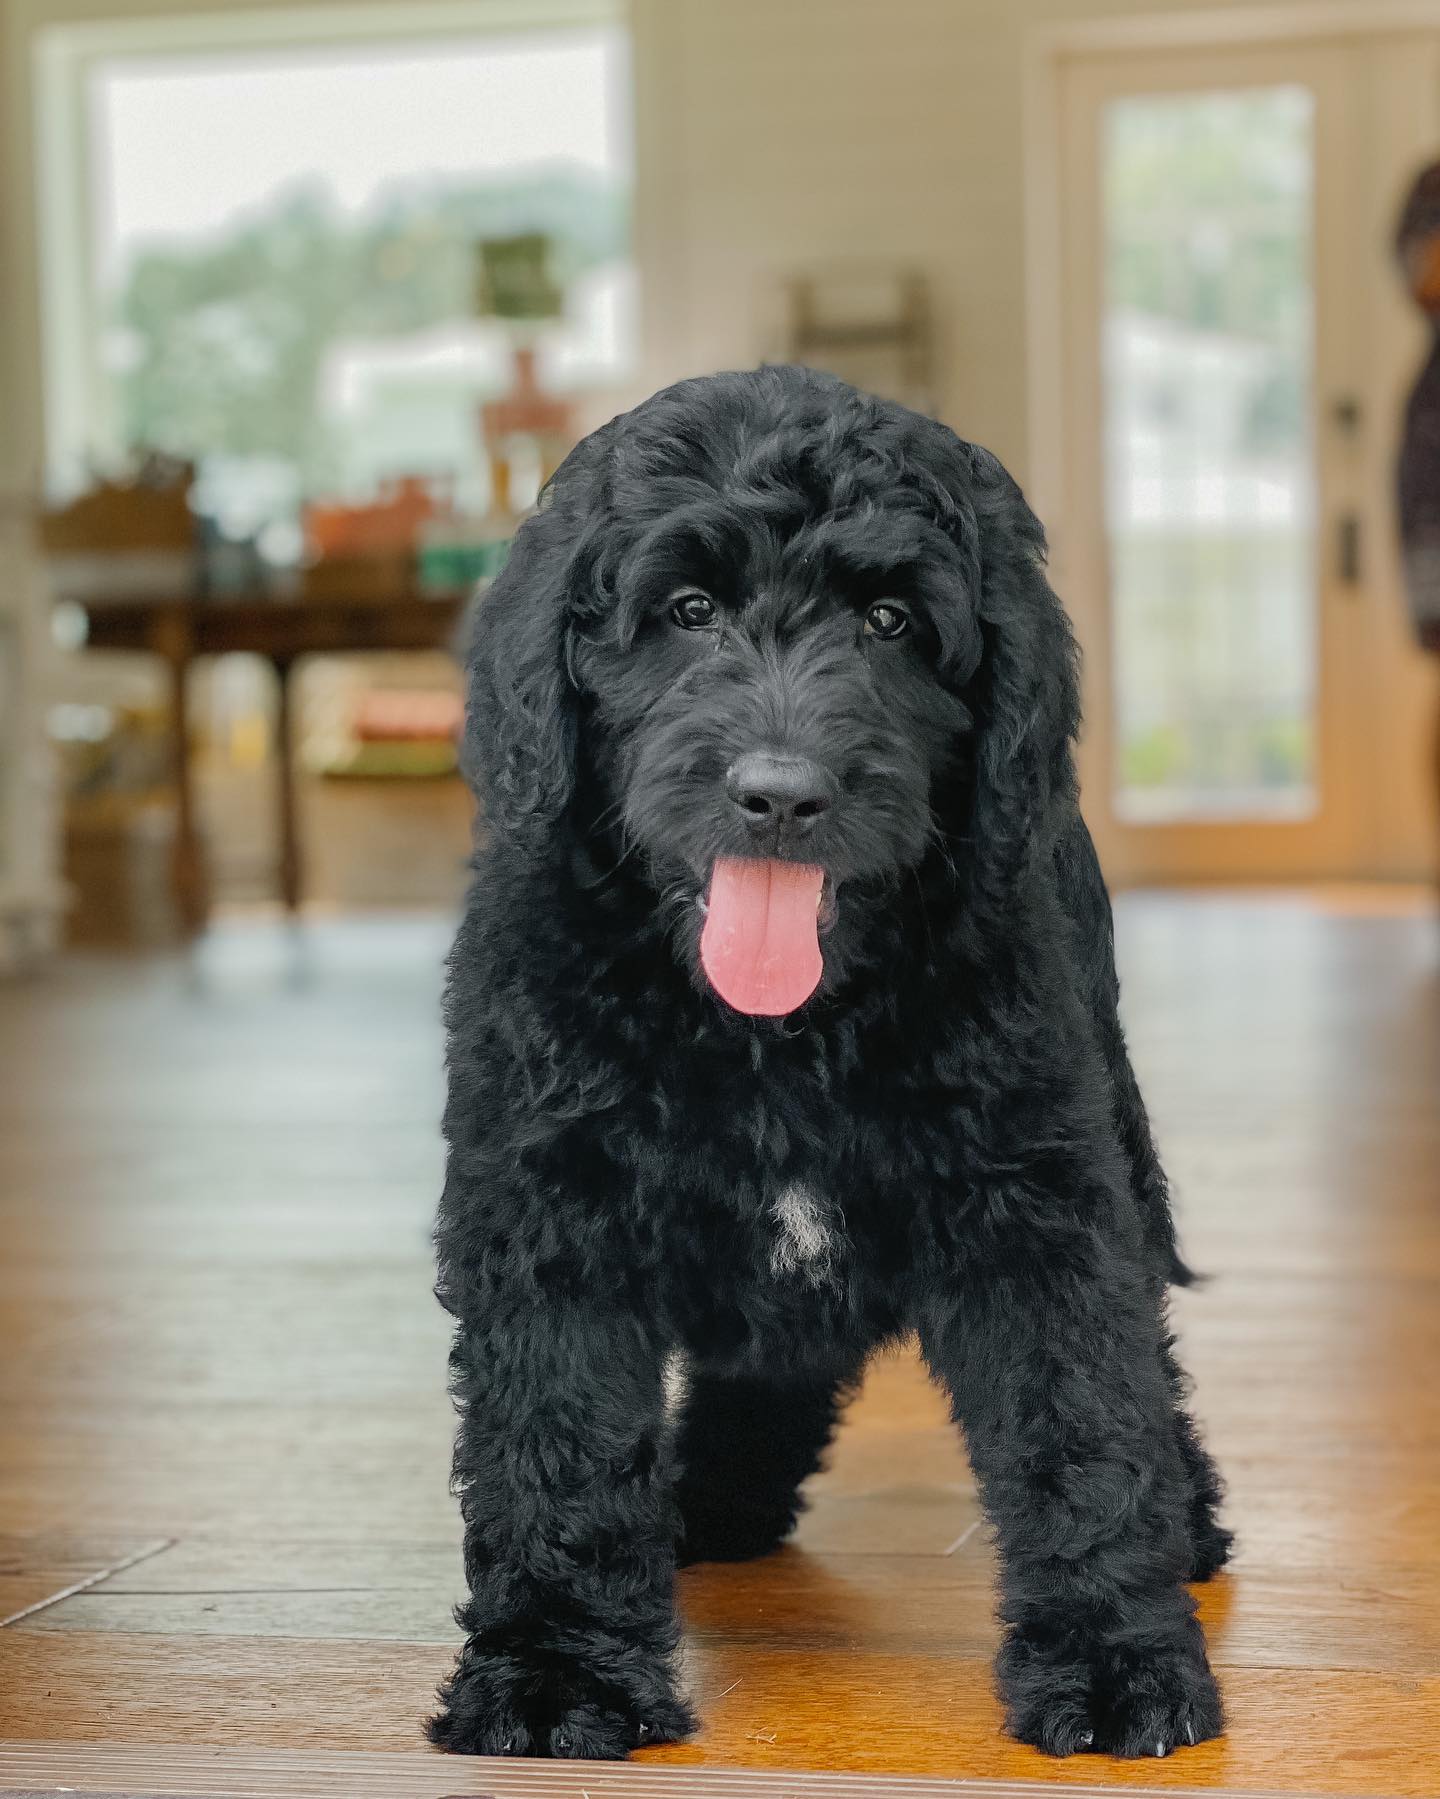 The Smeraglia Teddybear Goldendoodle is a black wavy coat golden doodle that is allergy-friendly and family-friendly. They make for cute puppies and even cuter mature adults.